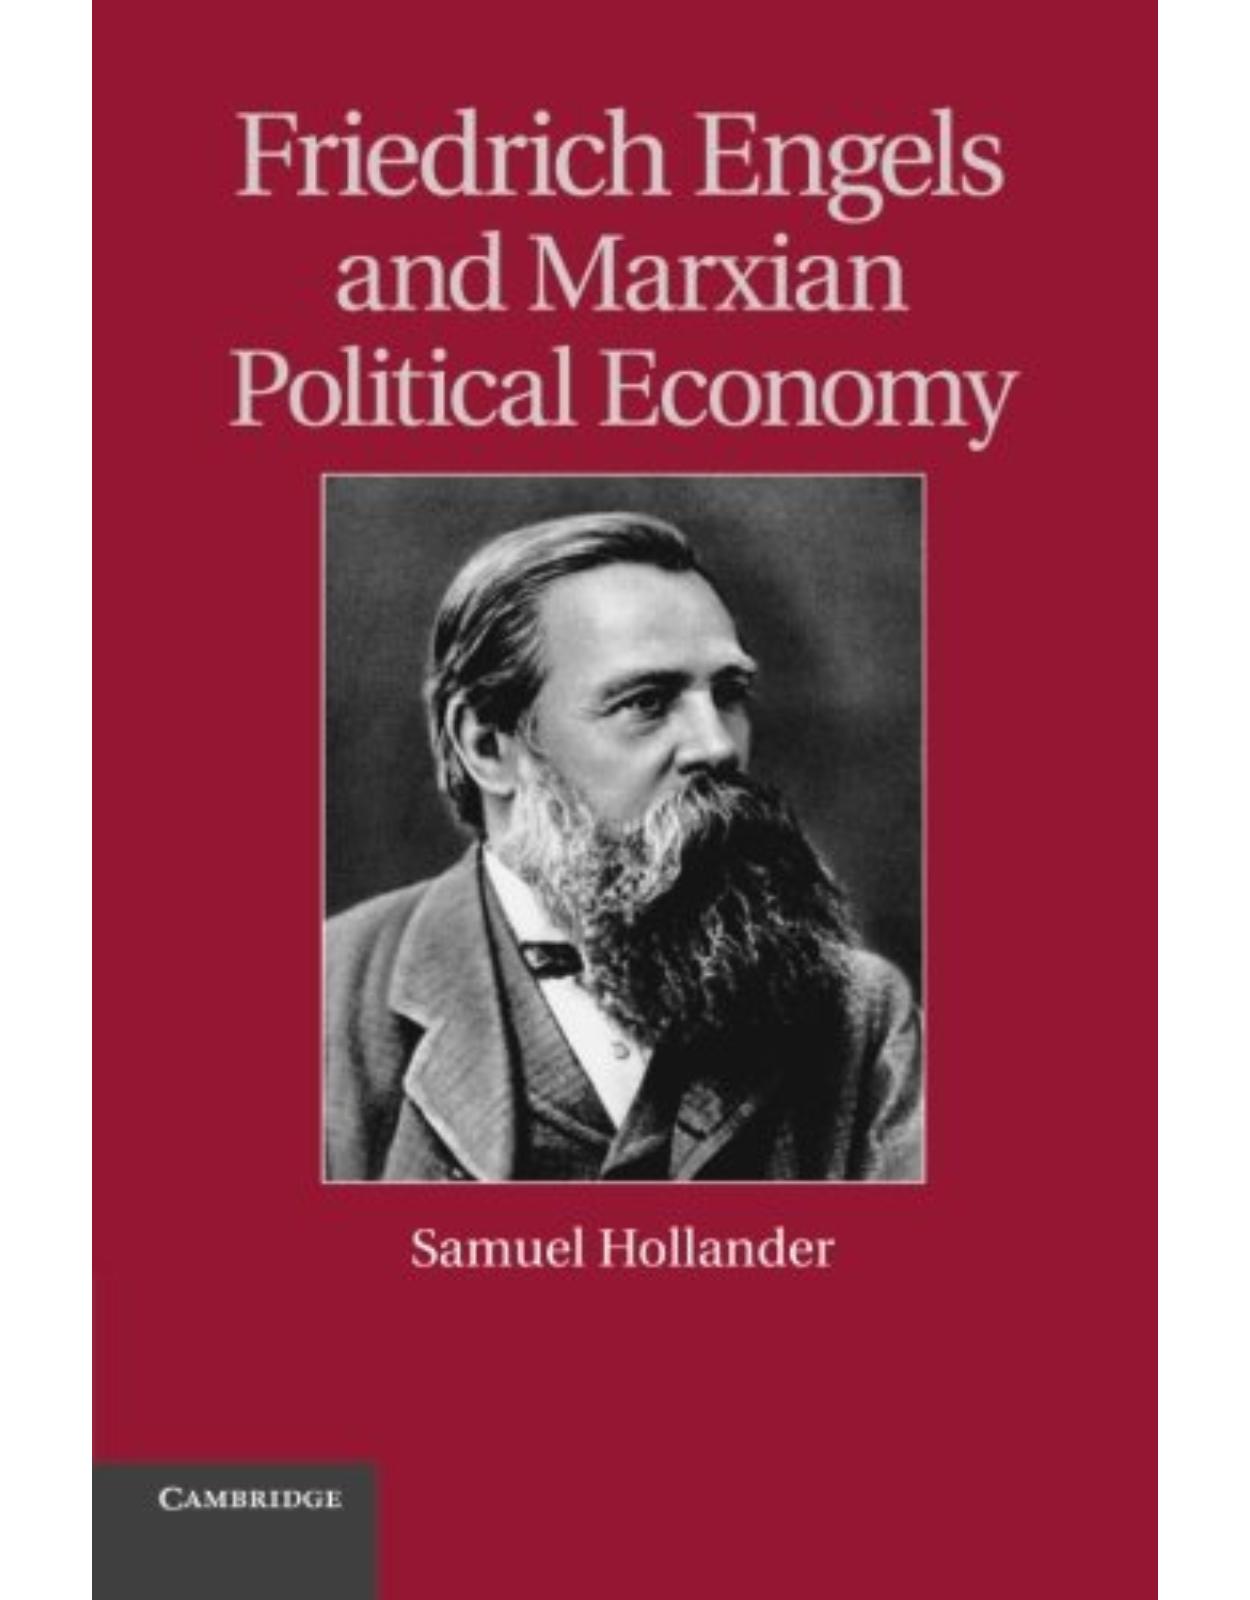 Friedrich Engels and Marxian Political Economy (Historical Perspectives on Modern Economics)